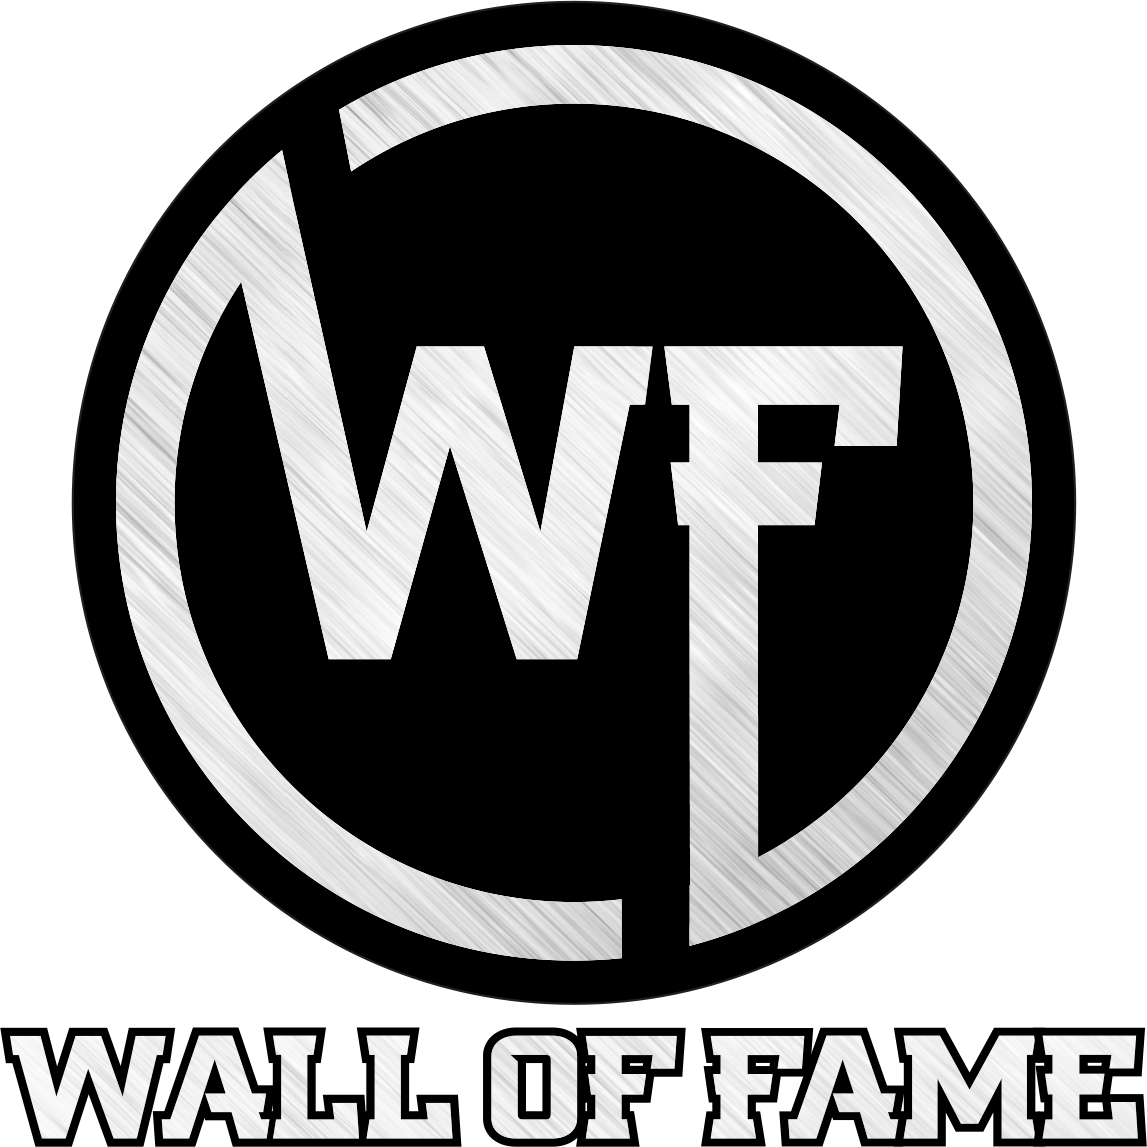 WALL OF FAME